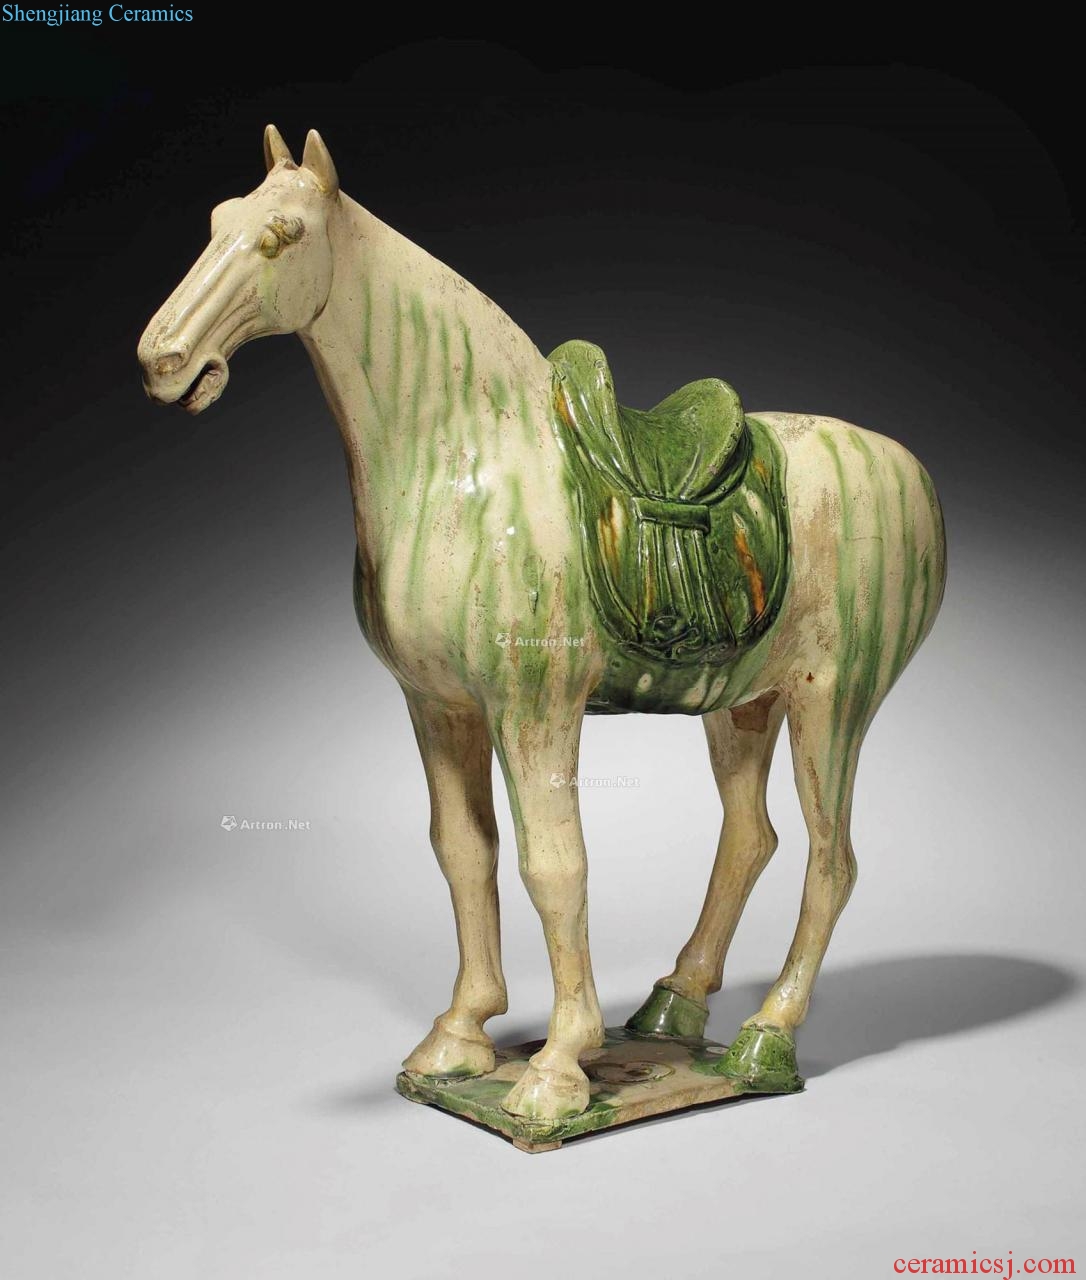 The tang dynasty (618-907), A LARGE SANCAI - GLAZED POTTERY FIGURE OF A HORSE